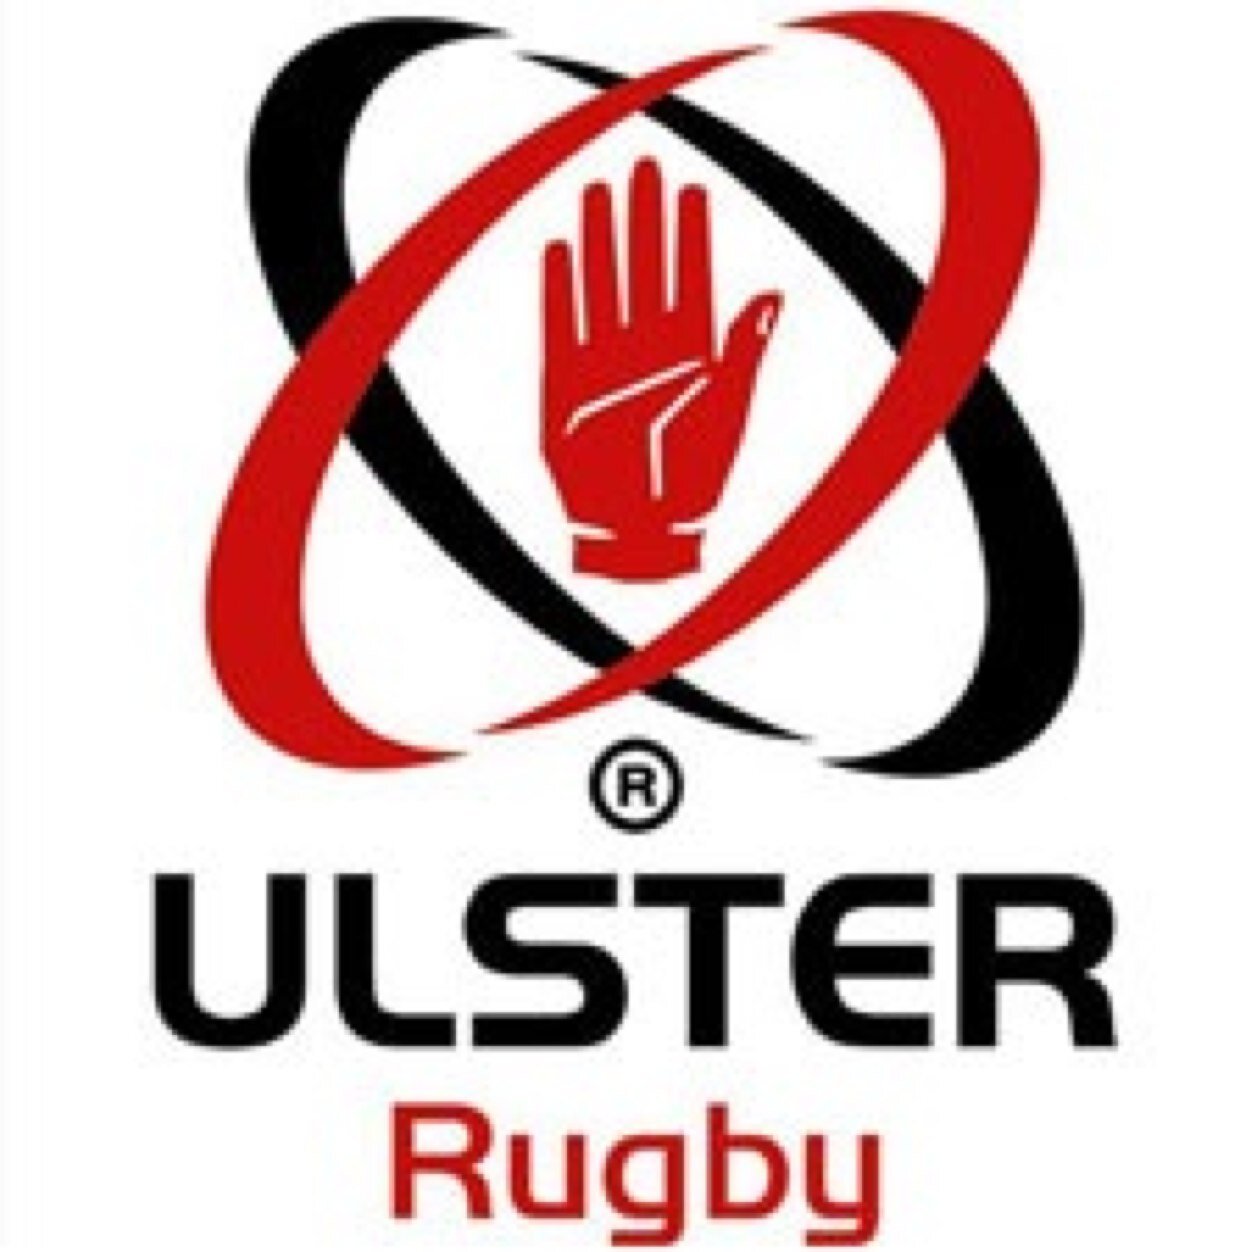 Documenting the things an Ulsterman would not say. SUFTUM.